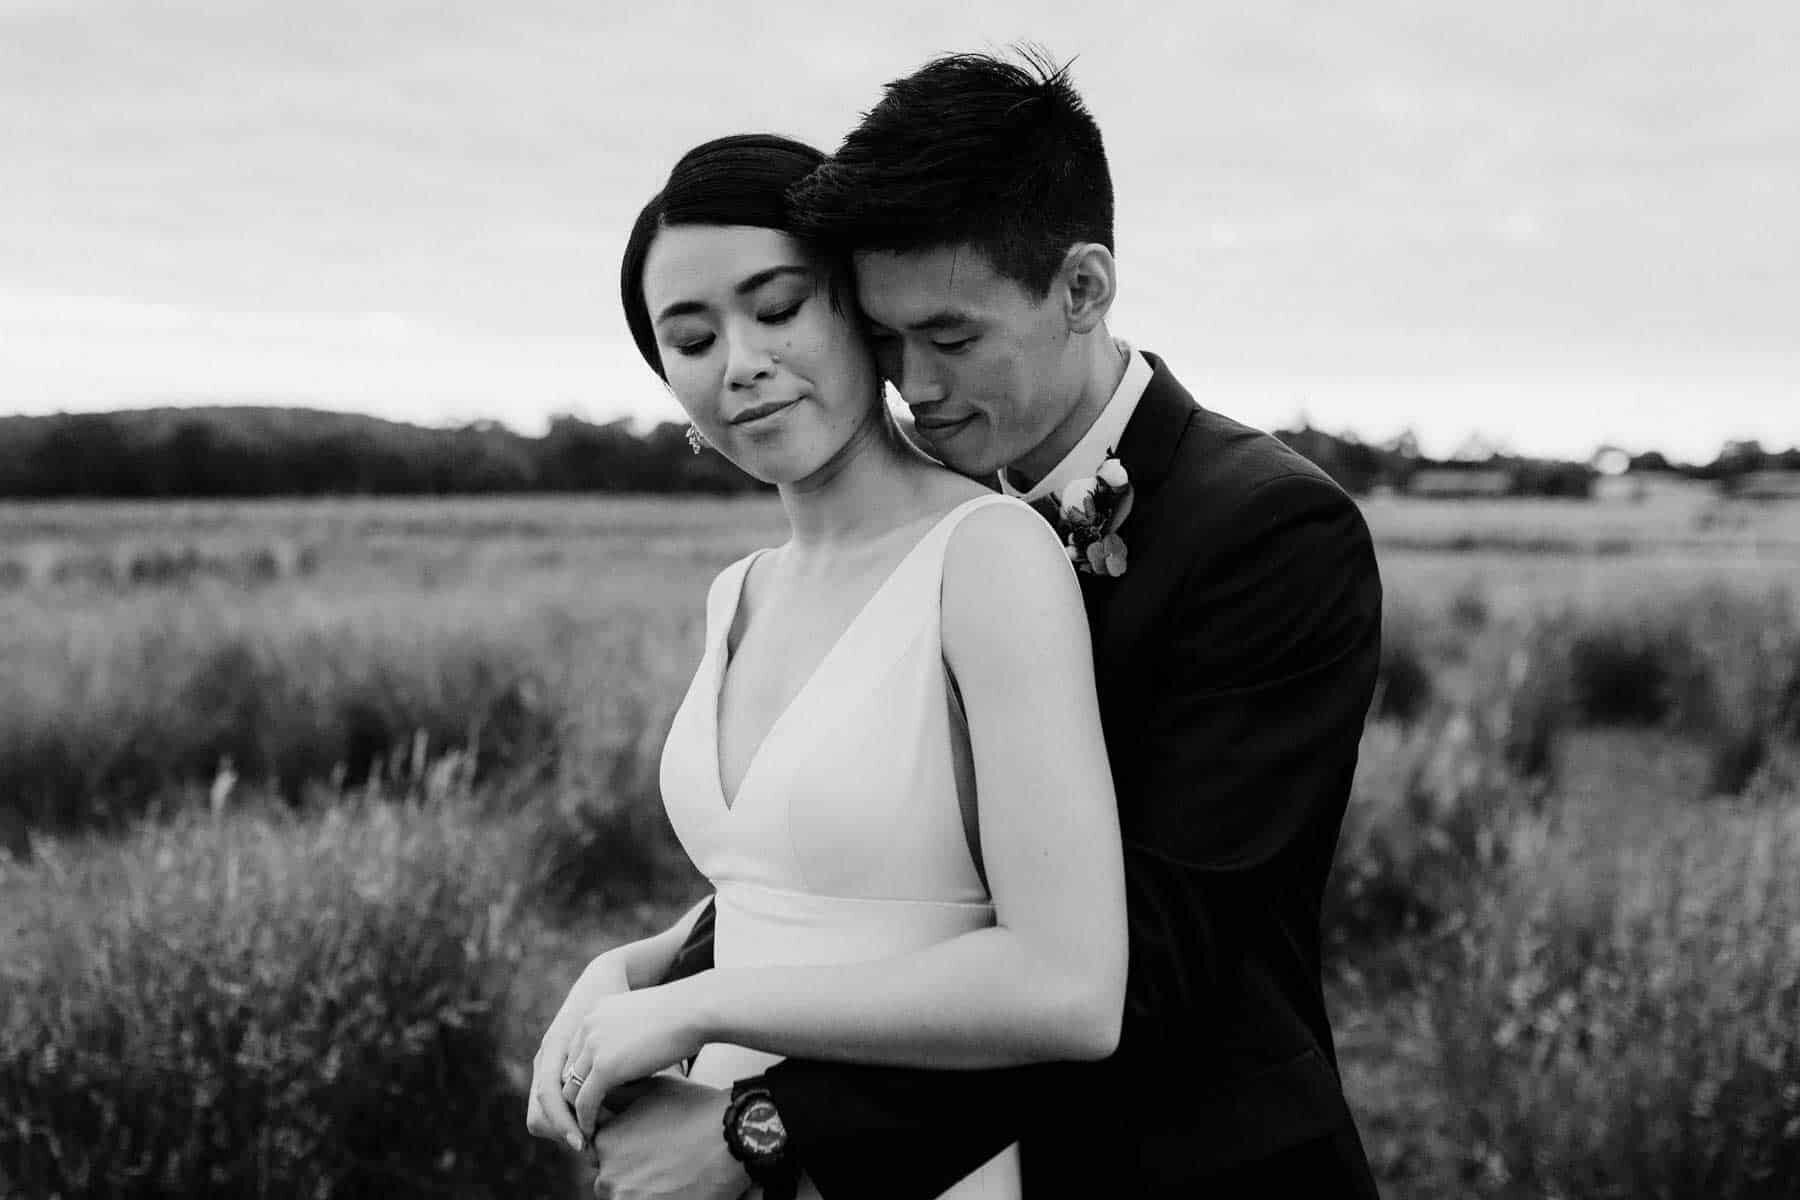 Long Way Home - journalistic wedding photography Melbourne